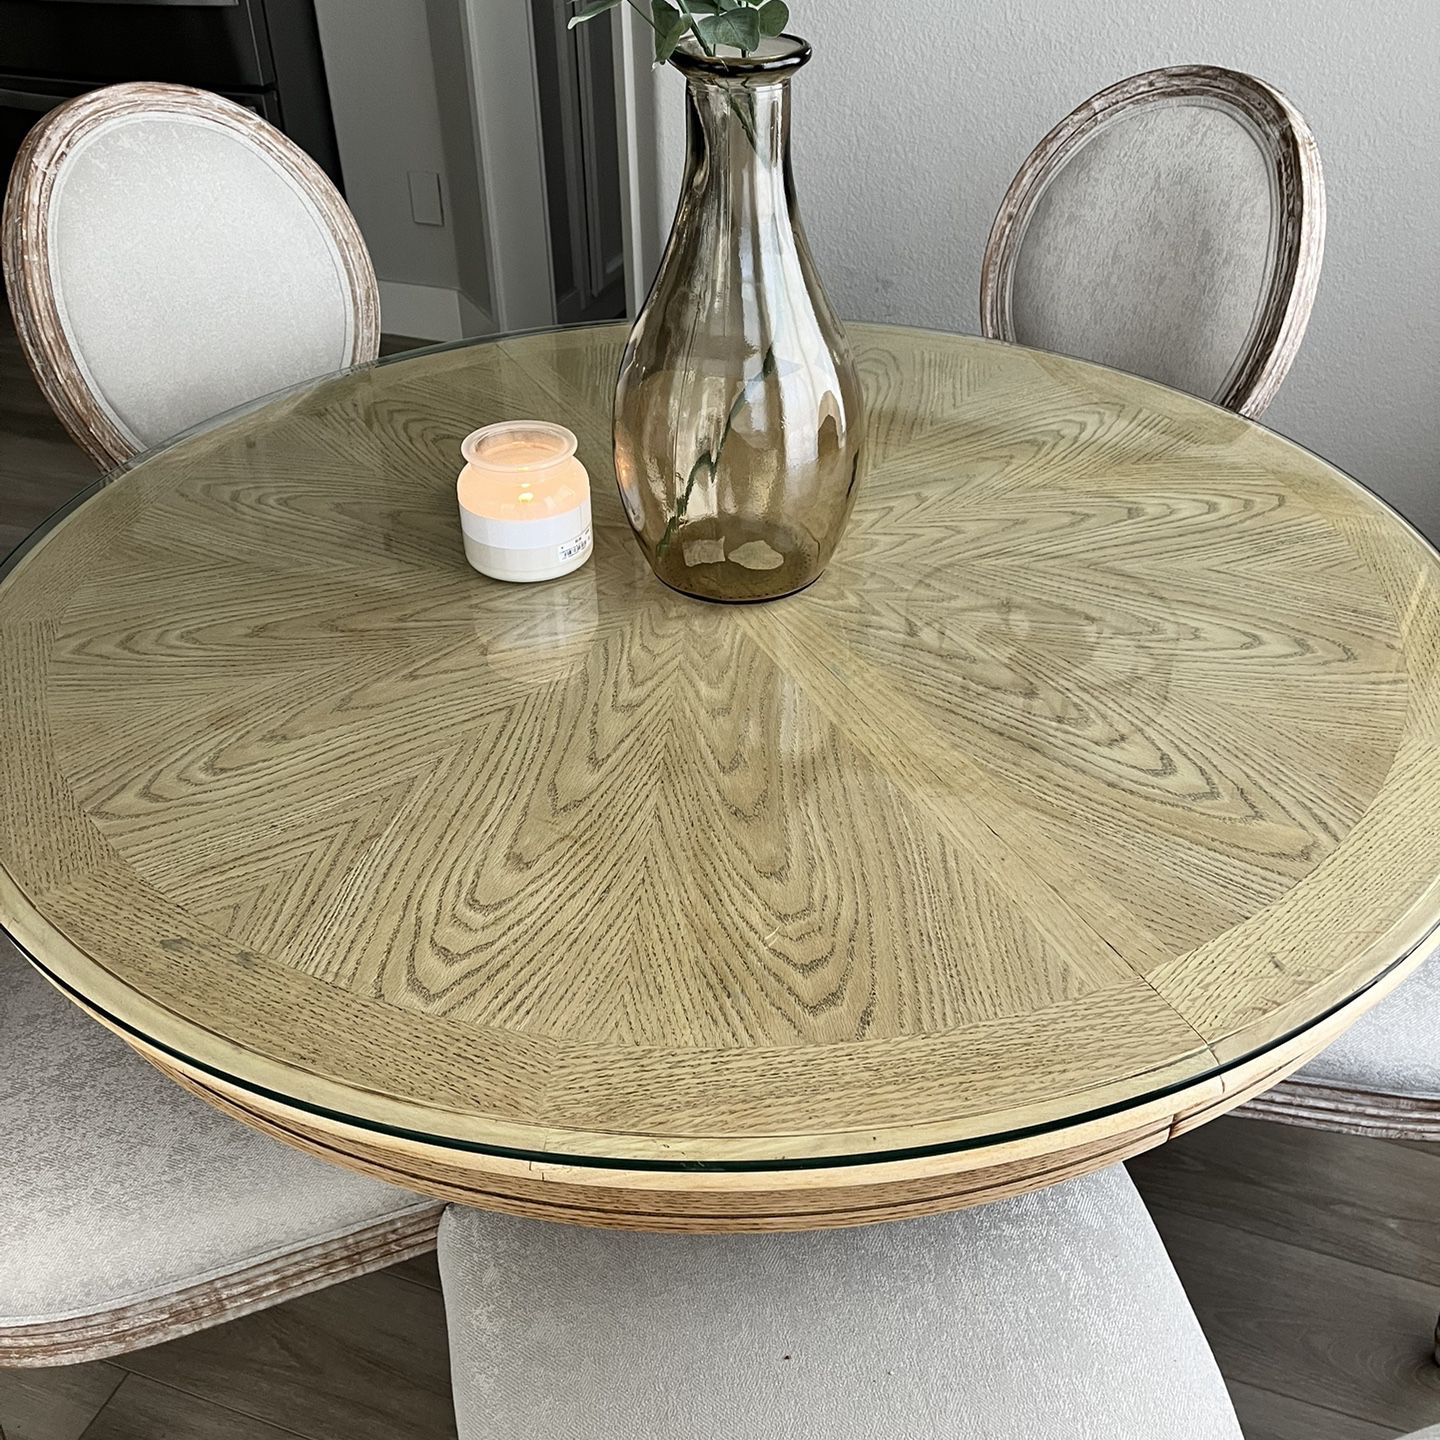 4 FOOT GLASS ROUND PIECE FOR TABLE TOP